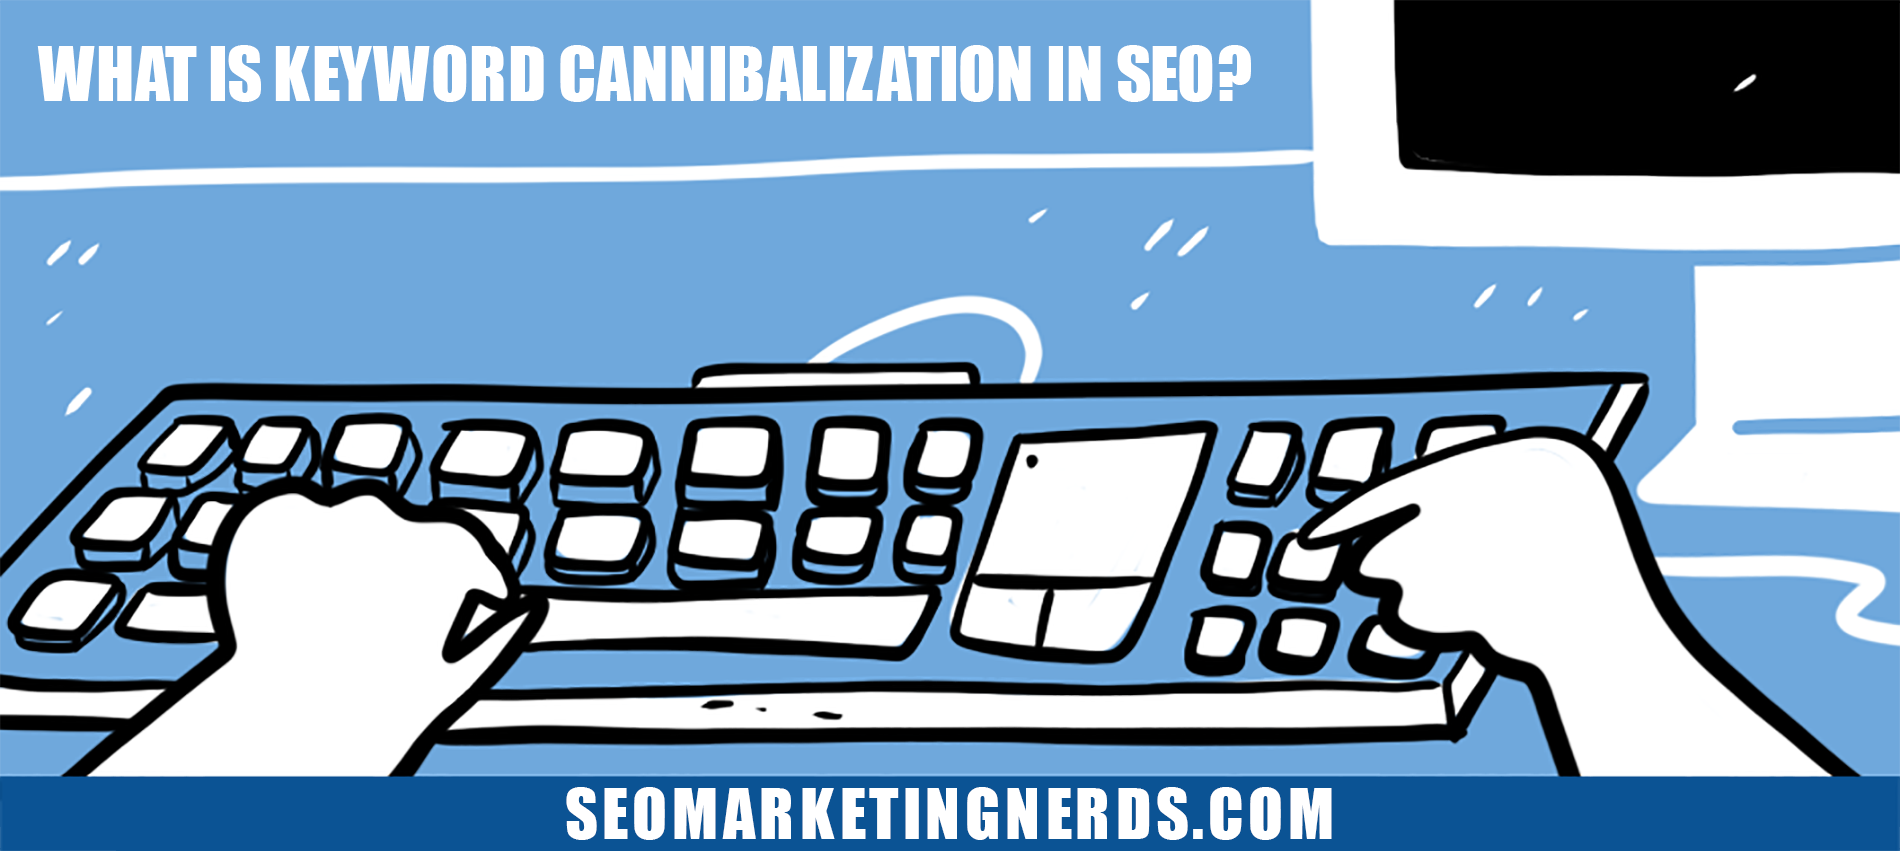 What Is Keyword Cannibalization in SEO?